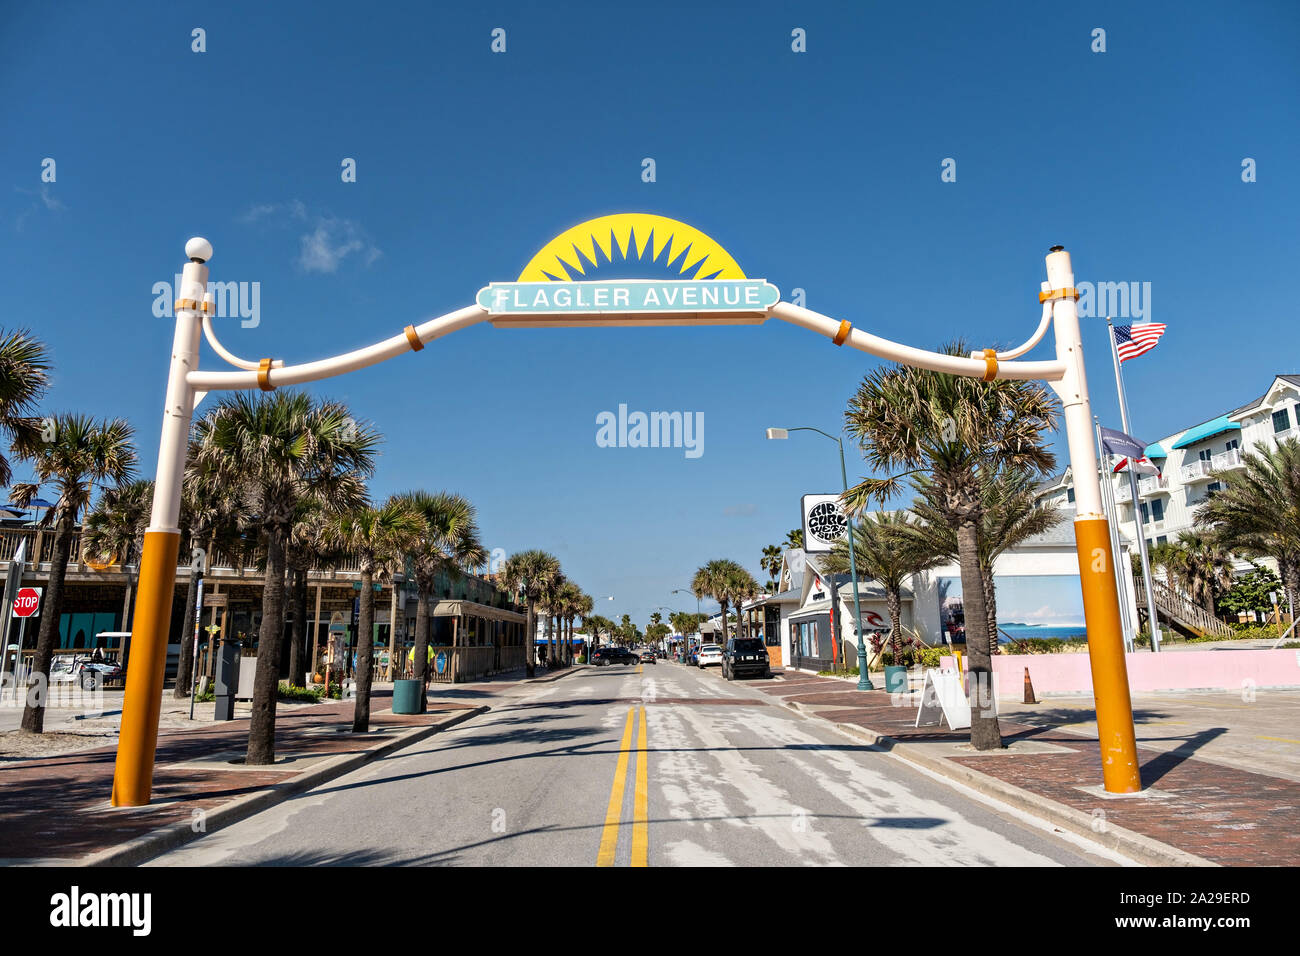 Car Entrance To Flagler Avenue Beach And Boardwalk In New Smyrna Beach Florida New Smyrna Allows Private Vehicles To Drive On The Sand And Park Along The Beach Stock Photo Alamy